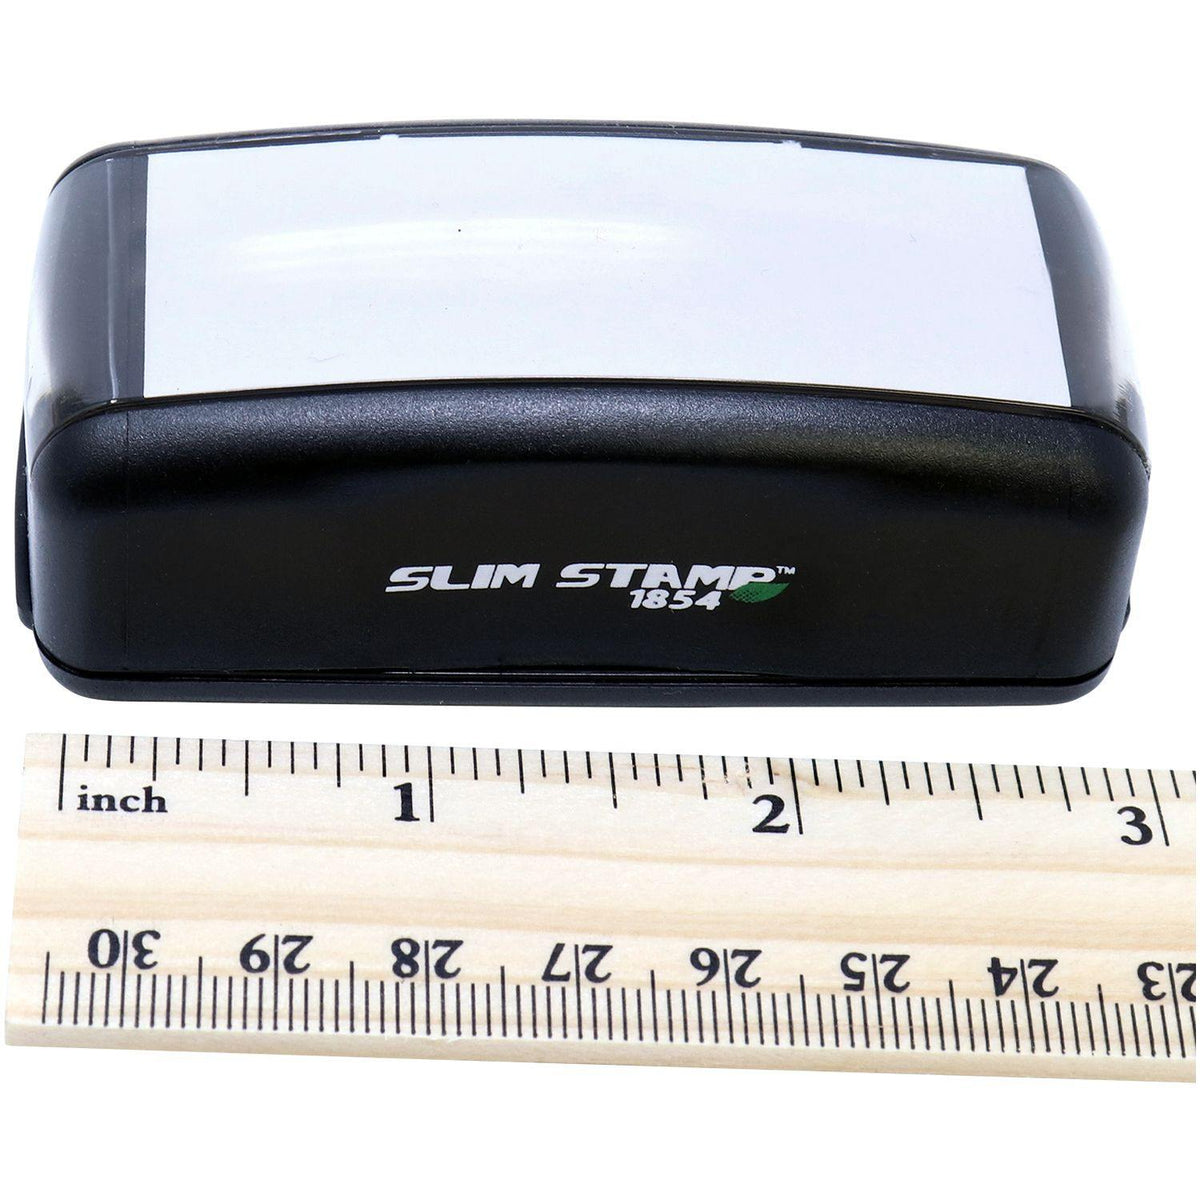 Measurement Large Pre-Inked Stop Covid Patient Stamp with Ruler